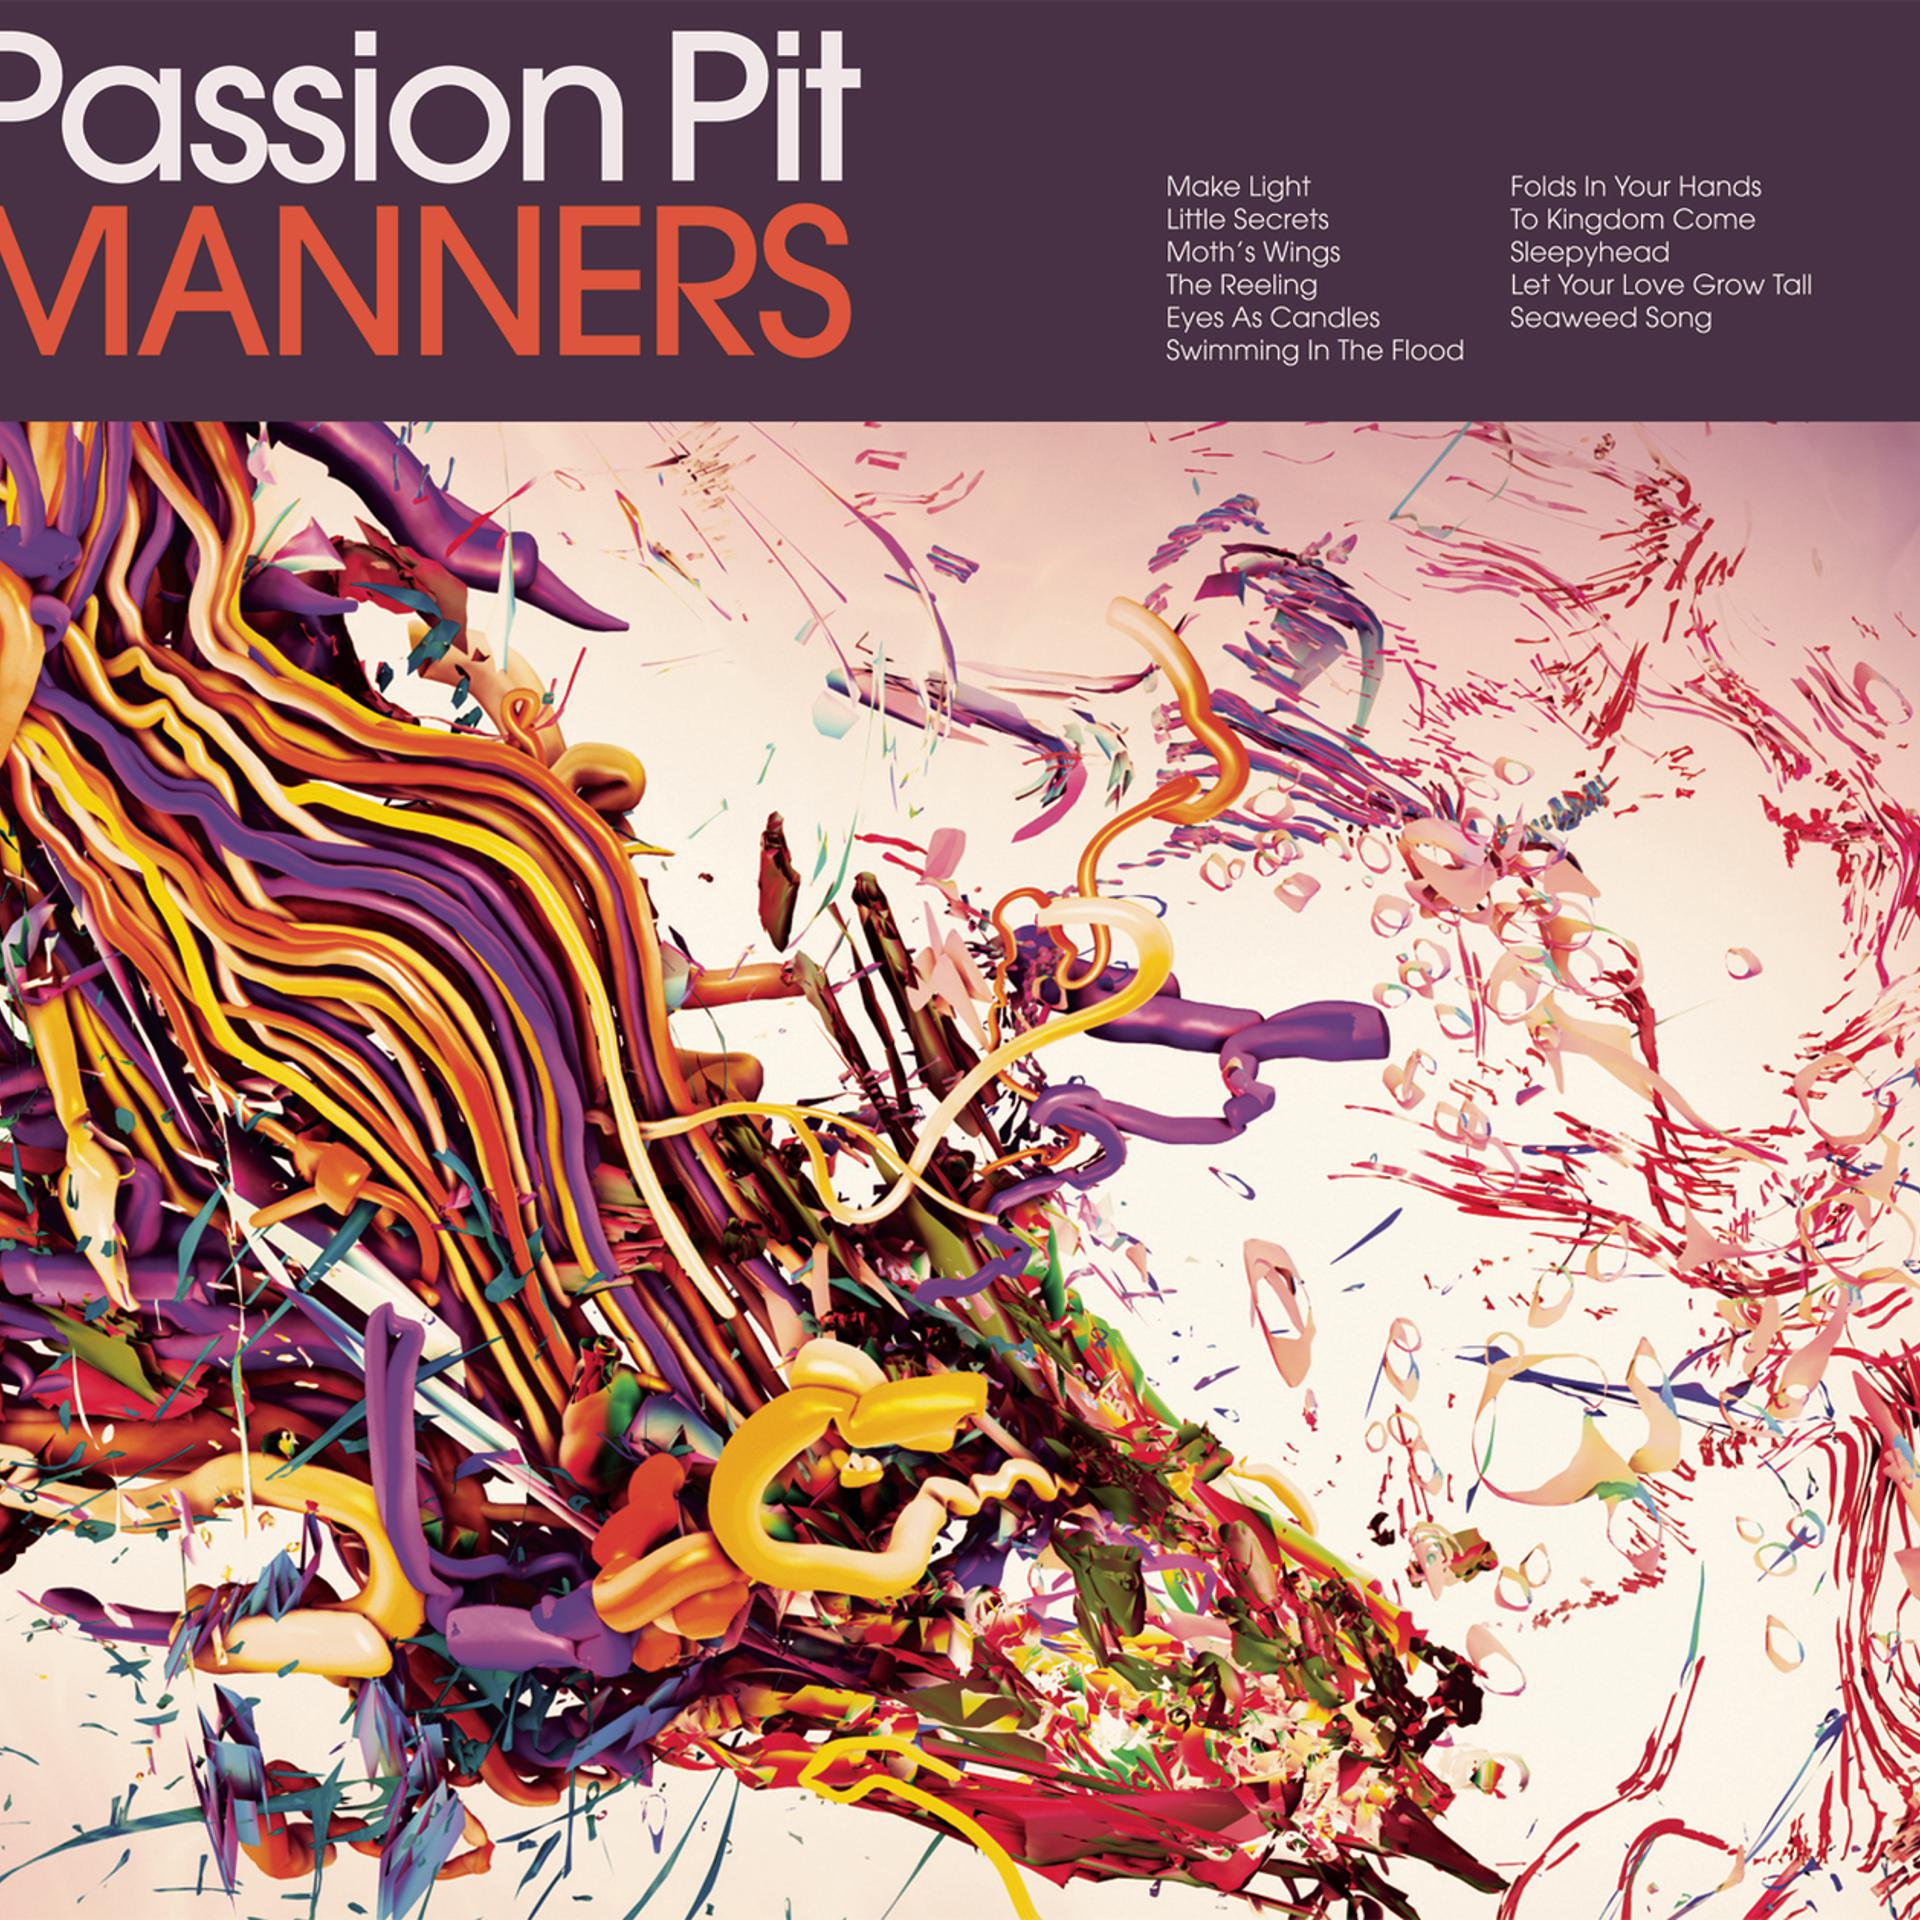 Passion Pit manners. Sleepyhead passion Pit. CD passion Pit: manners. Passion Sleepyhead.